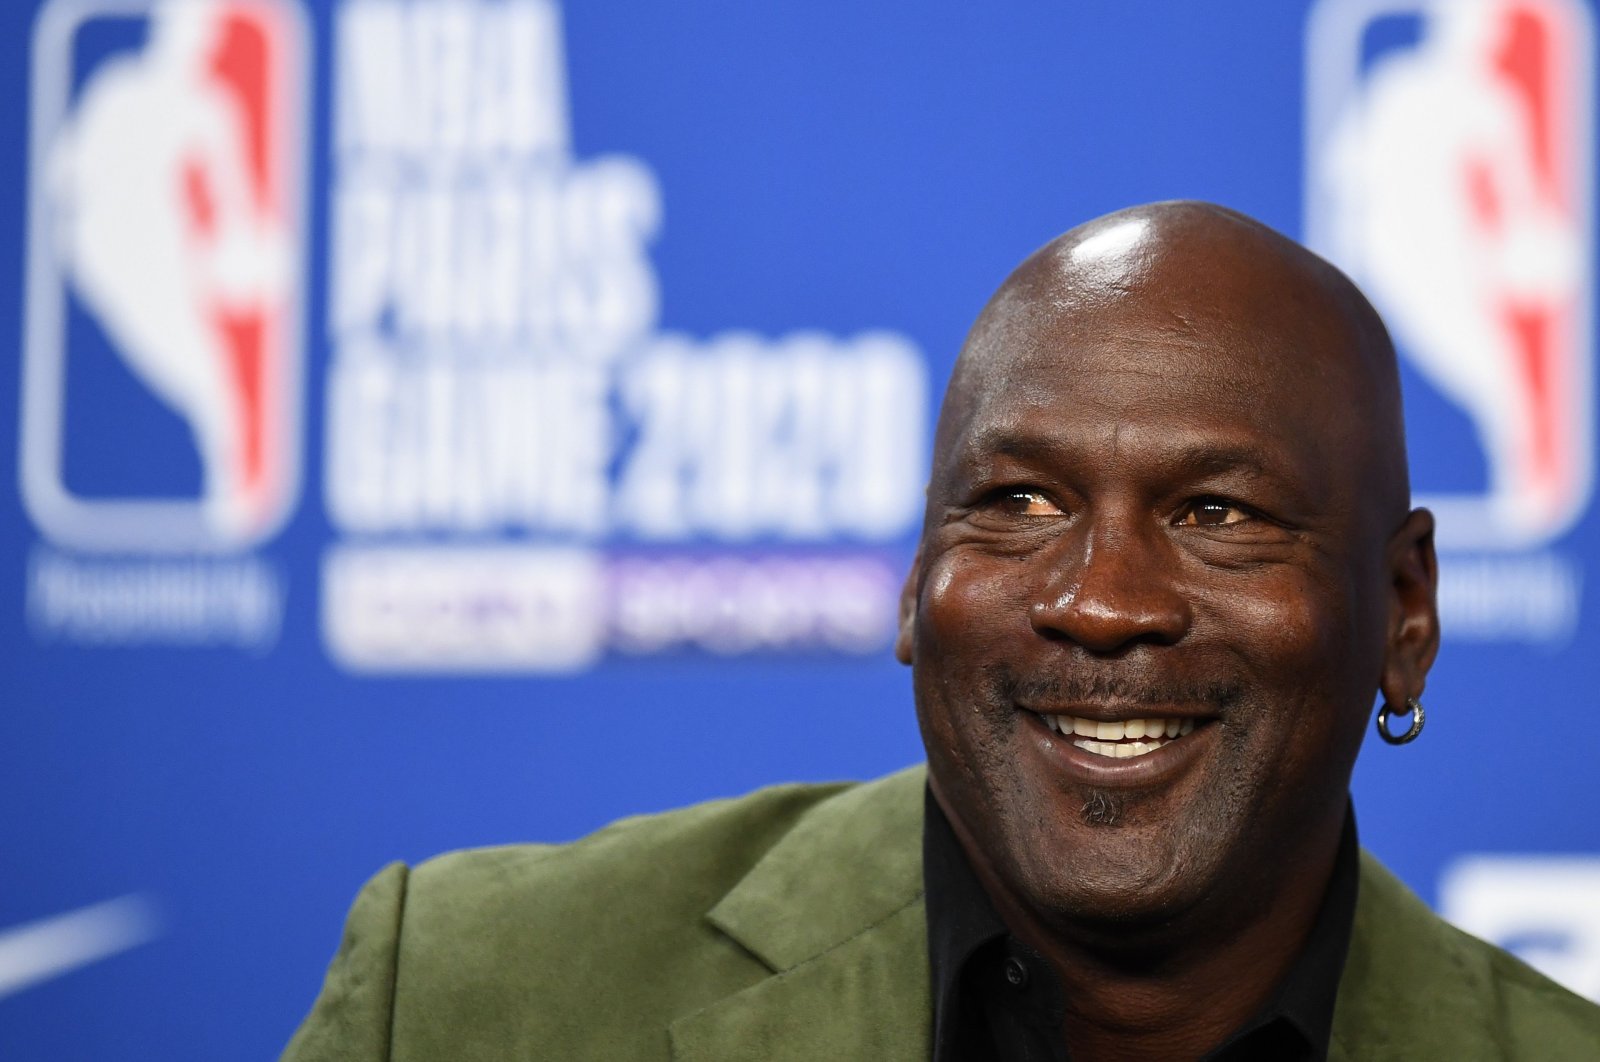 In this file photo former NBA star and owner of Charlotte Hornets team Michael Jordan looks on as he addresses a press conference ahead of the NBA basketball match between Milwaukee Bucks and Charlotte Hornets at The AccorHotels Arena in Paris on January 24, 2020. (AFP Photo)